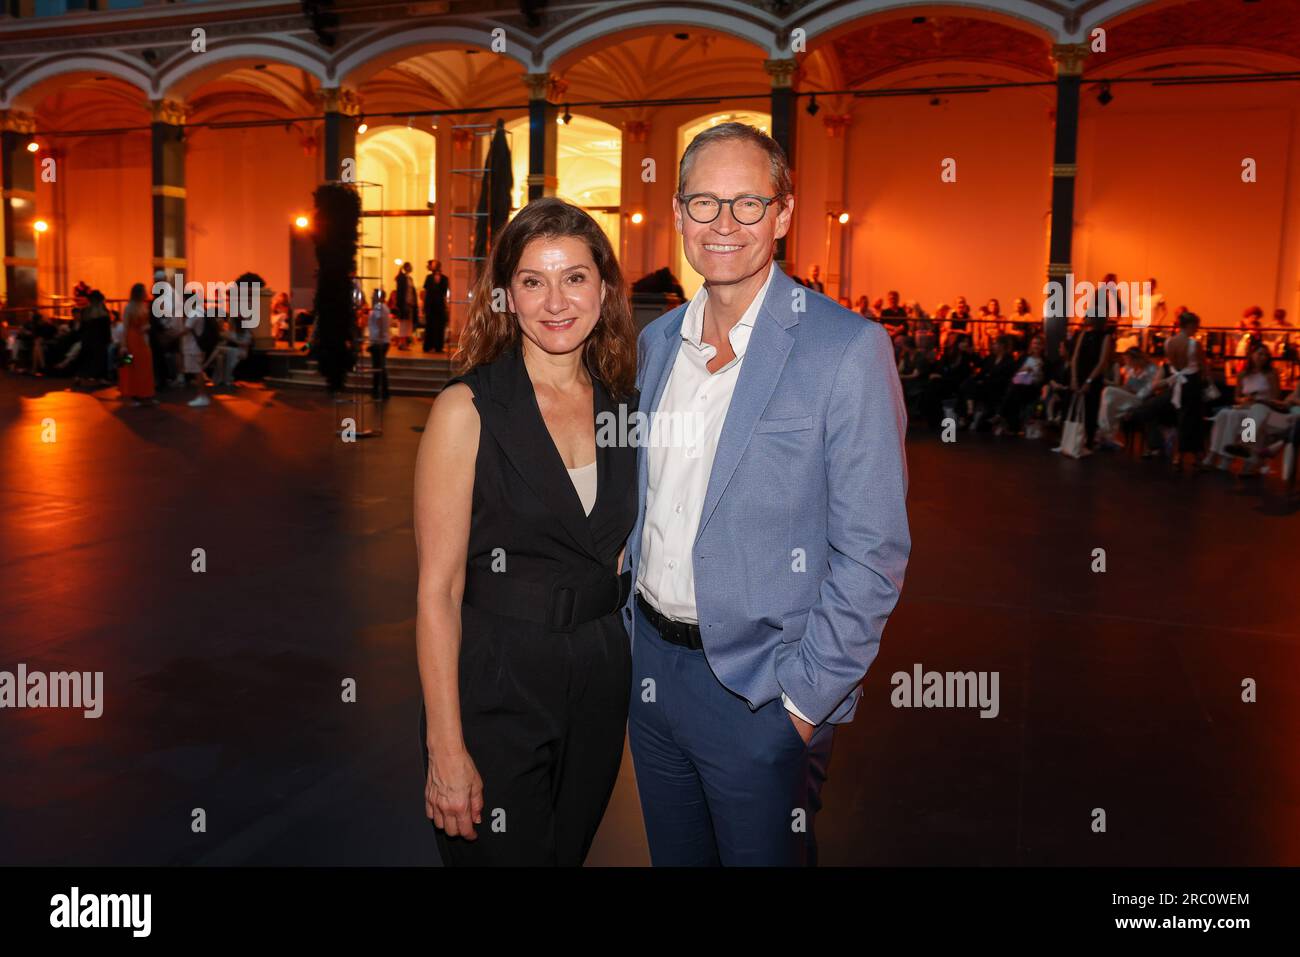 Berlin, Germany. 11th July, 2023. Michael Müller and Reyhan Sahin attend the fashion show of the label 'William Fan' at the Gropius Bau during Berlin Fashion Week. Handbags made from recycled shoes, cashmere in summer and lots of denim - Fashion Week focuses on sustainability. Credit: Gerald Matzka/dpa/Alamy Live News Stock Photo